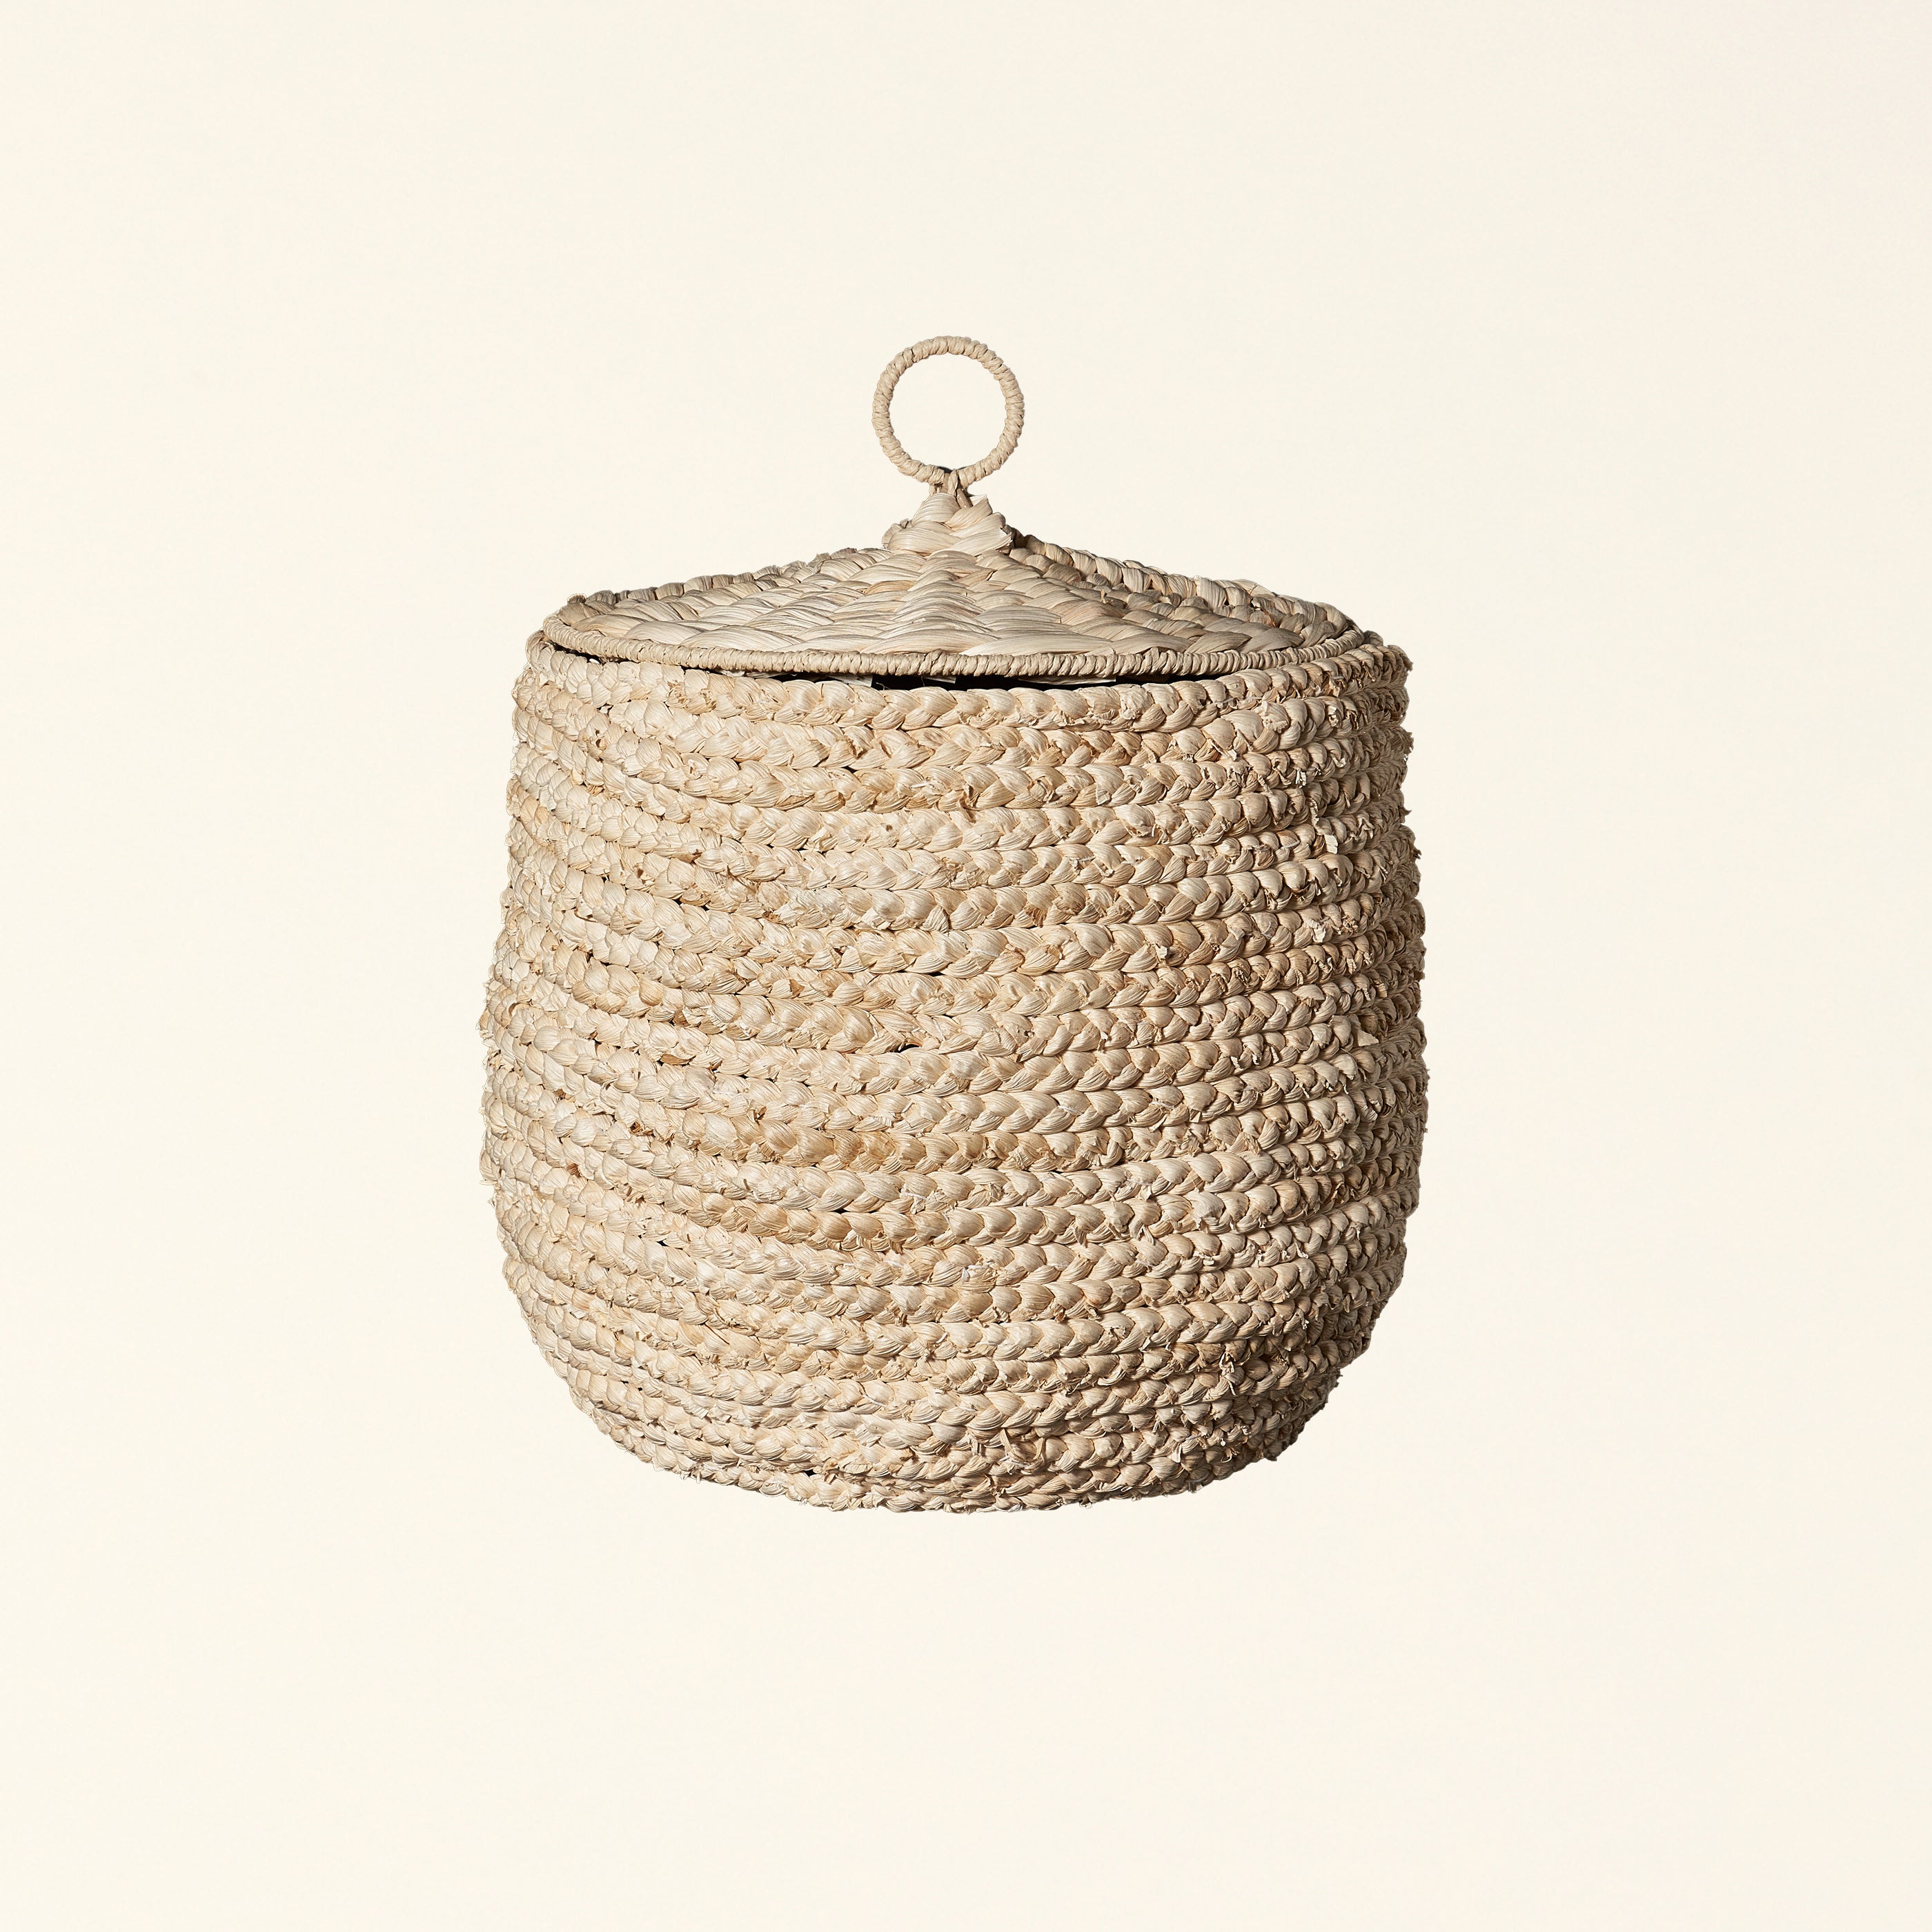 Woven Seagrass Baskets with Lids